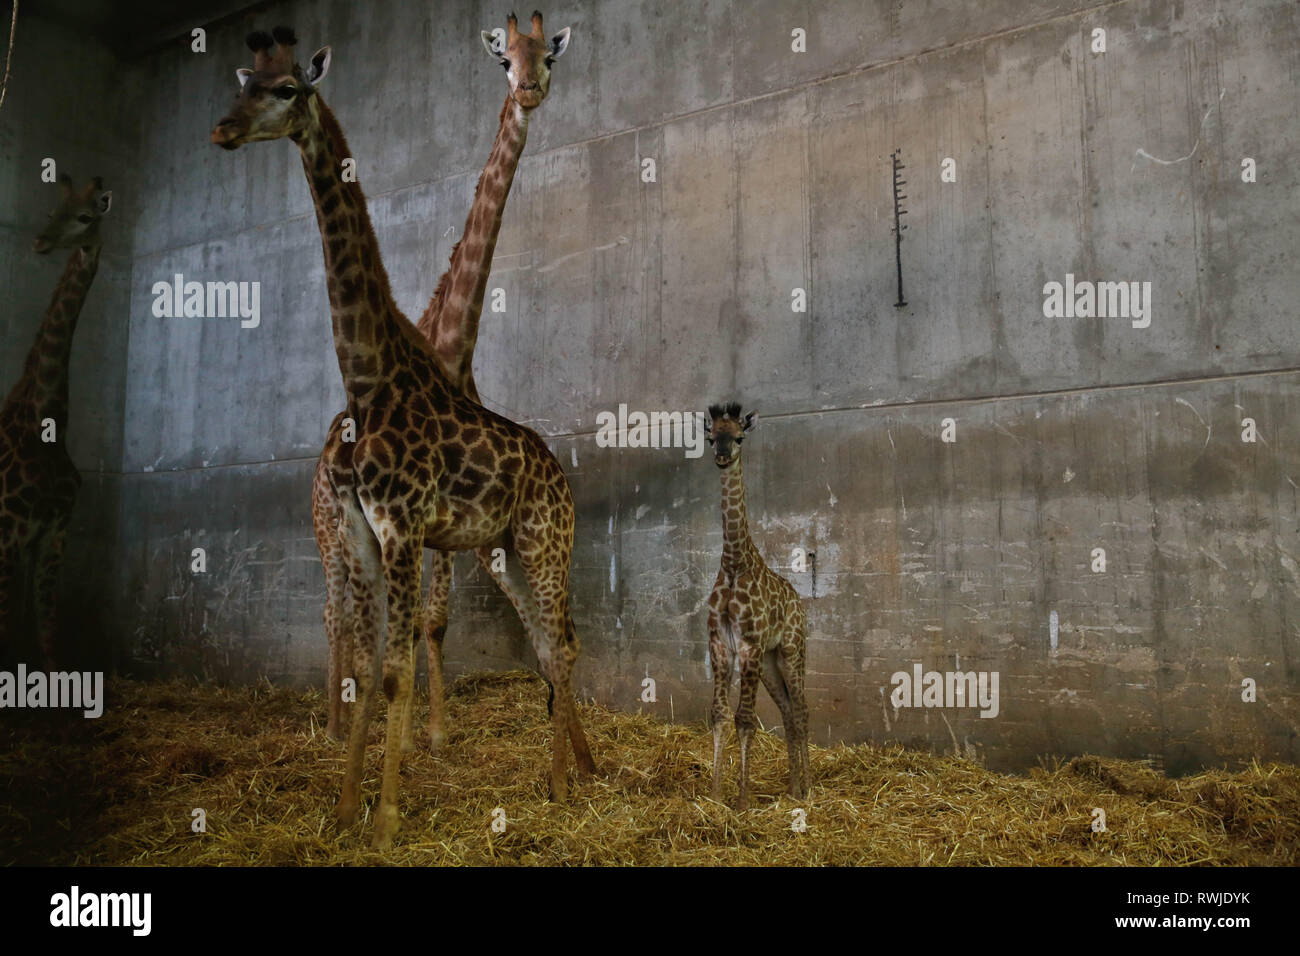 Jerusalem. 6th Mar, 2019. A two-week-old South African giraffe calf (R) is seen at the Jerusalem Biblical Zoo in Jerusalem, on March 6, 2019. Credit: Gil Cohen Magen/Xinhua/Alamy Live News Stock Photo